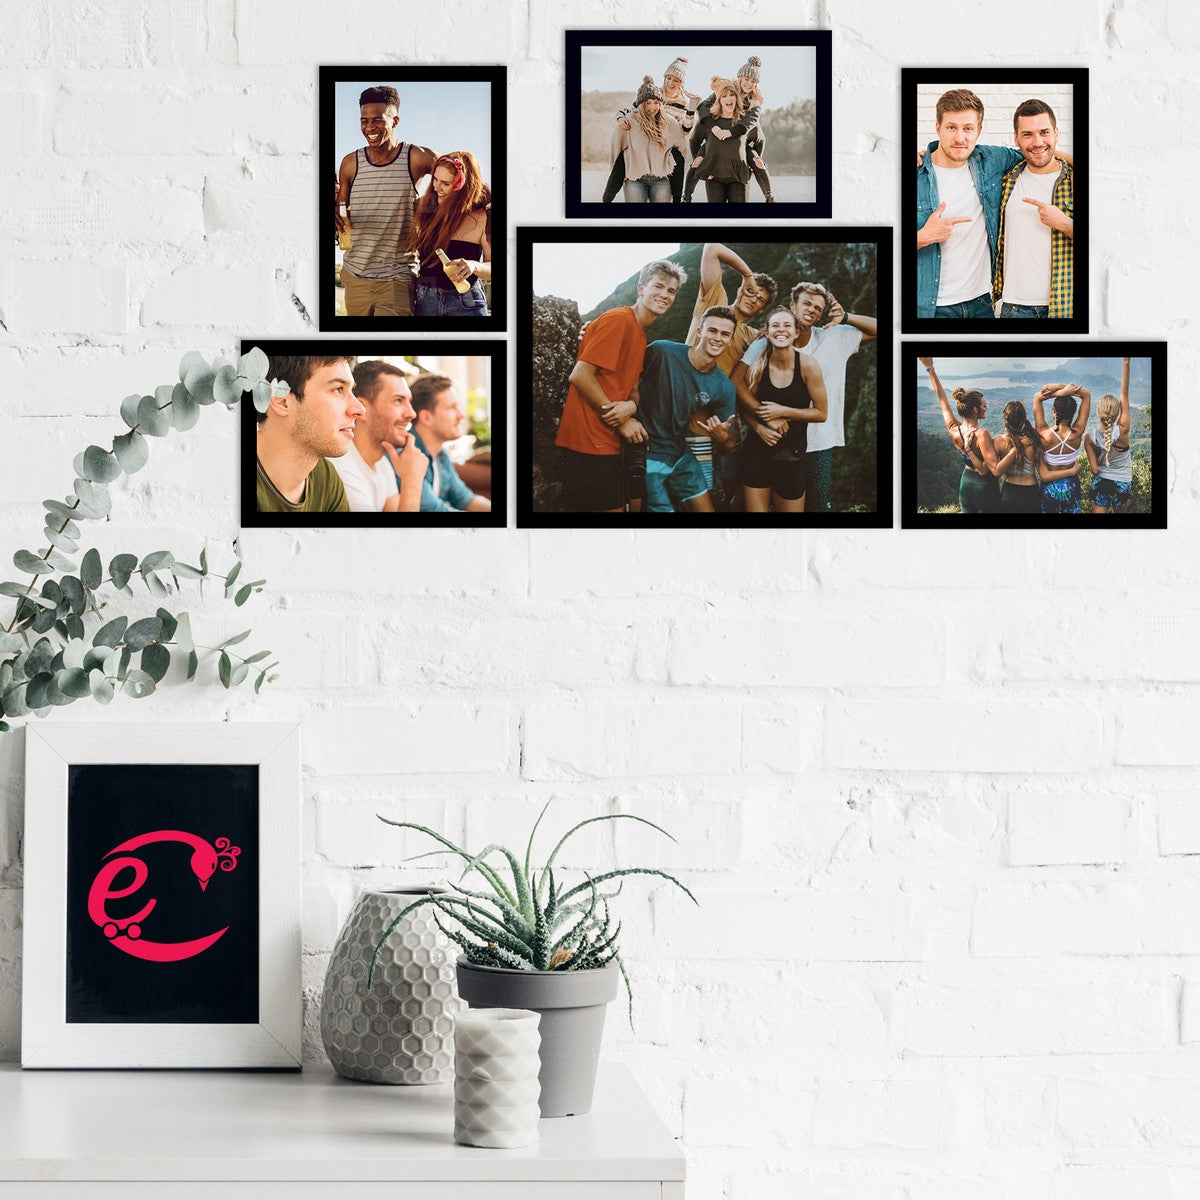 Memory Wall Collage Photo Frame - Set of 6 Photo Frames for 5 Photos of 5"x7", 1 Photos of 8"x10" 1